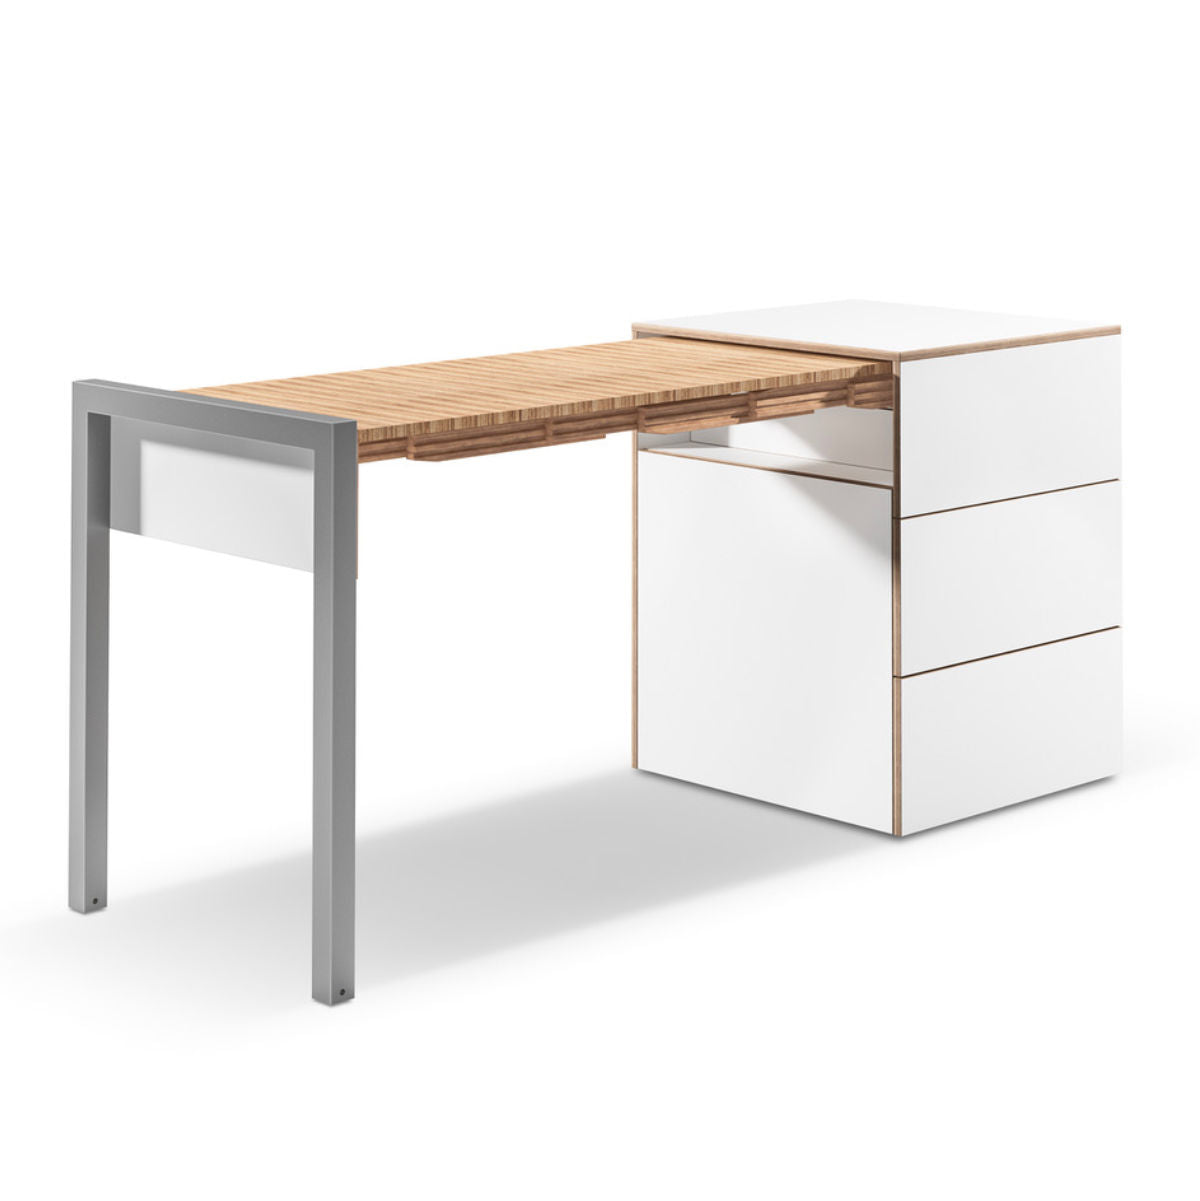 Alwin's Space Box Extendable Table Drawers , White/Beech Laminated Veneer